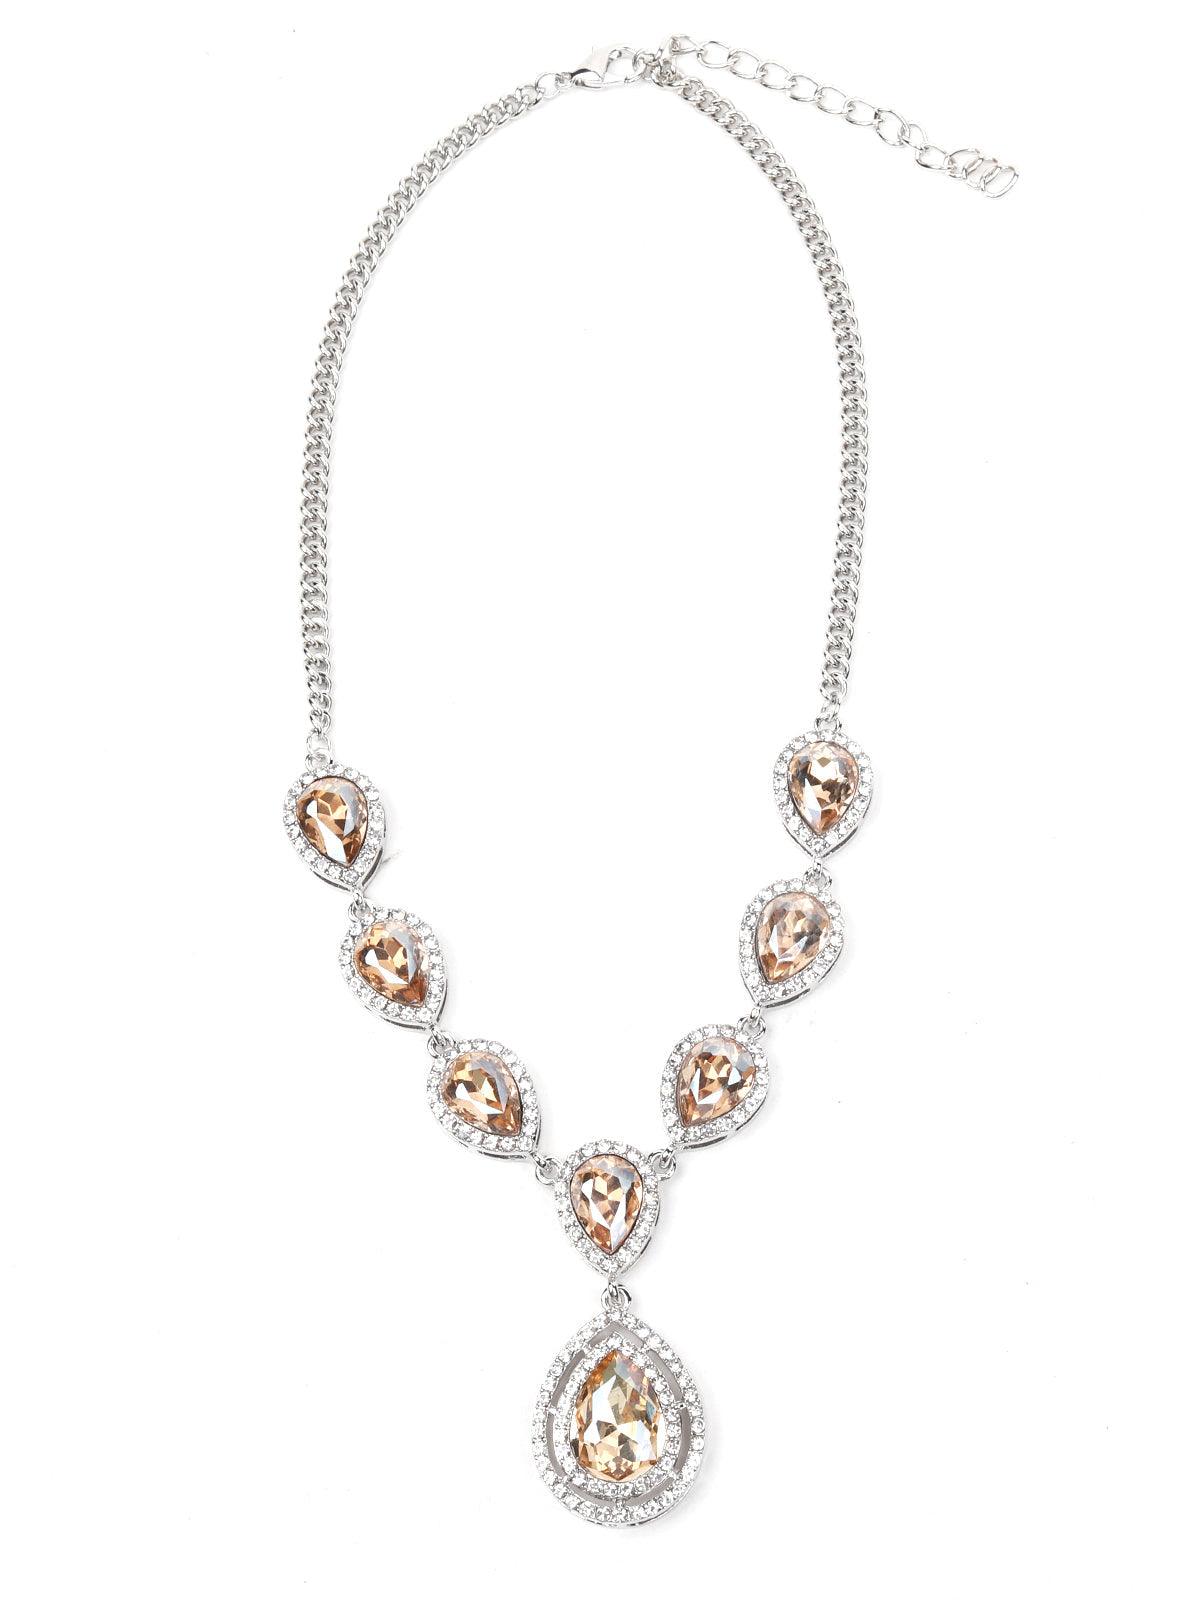 Women's Contemporary Rounded Studded Necklace - Odette